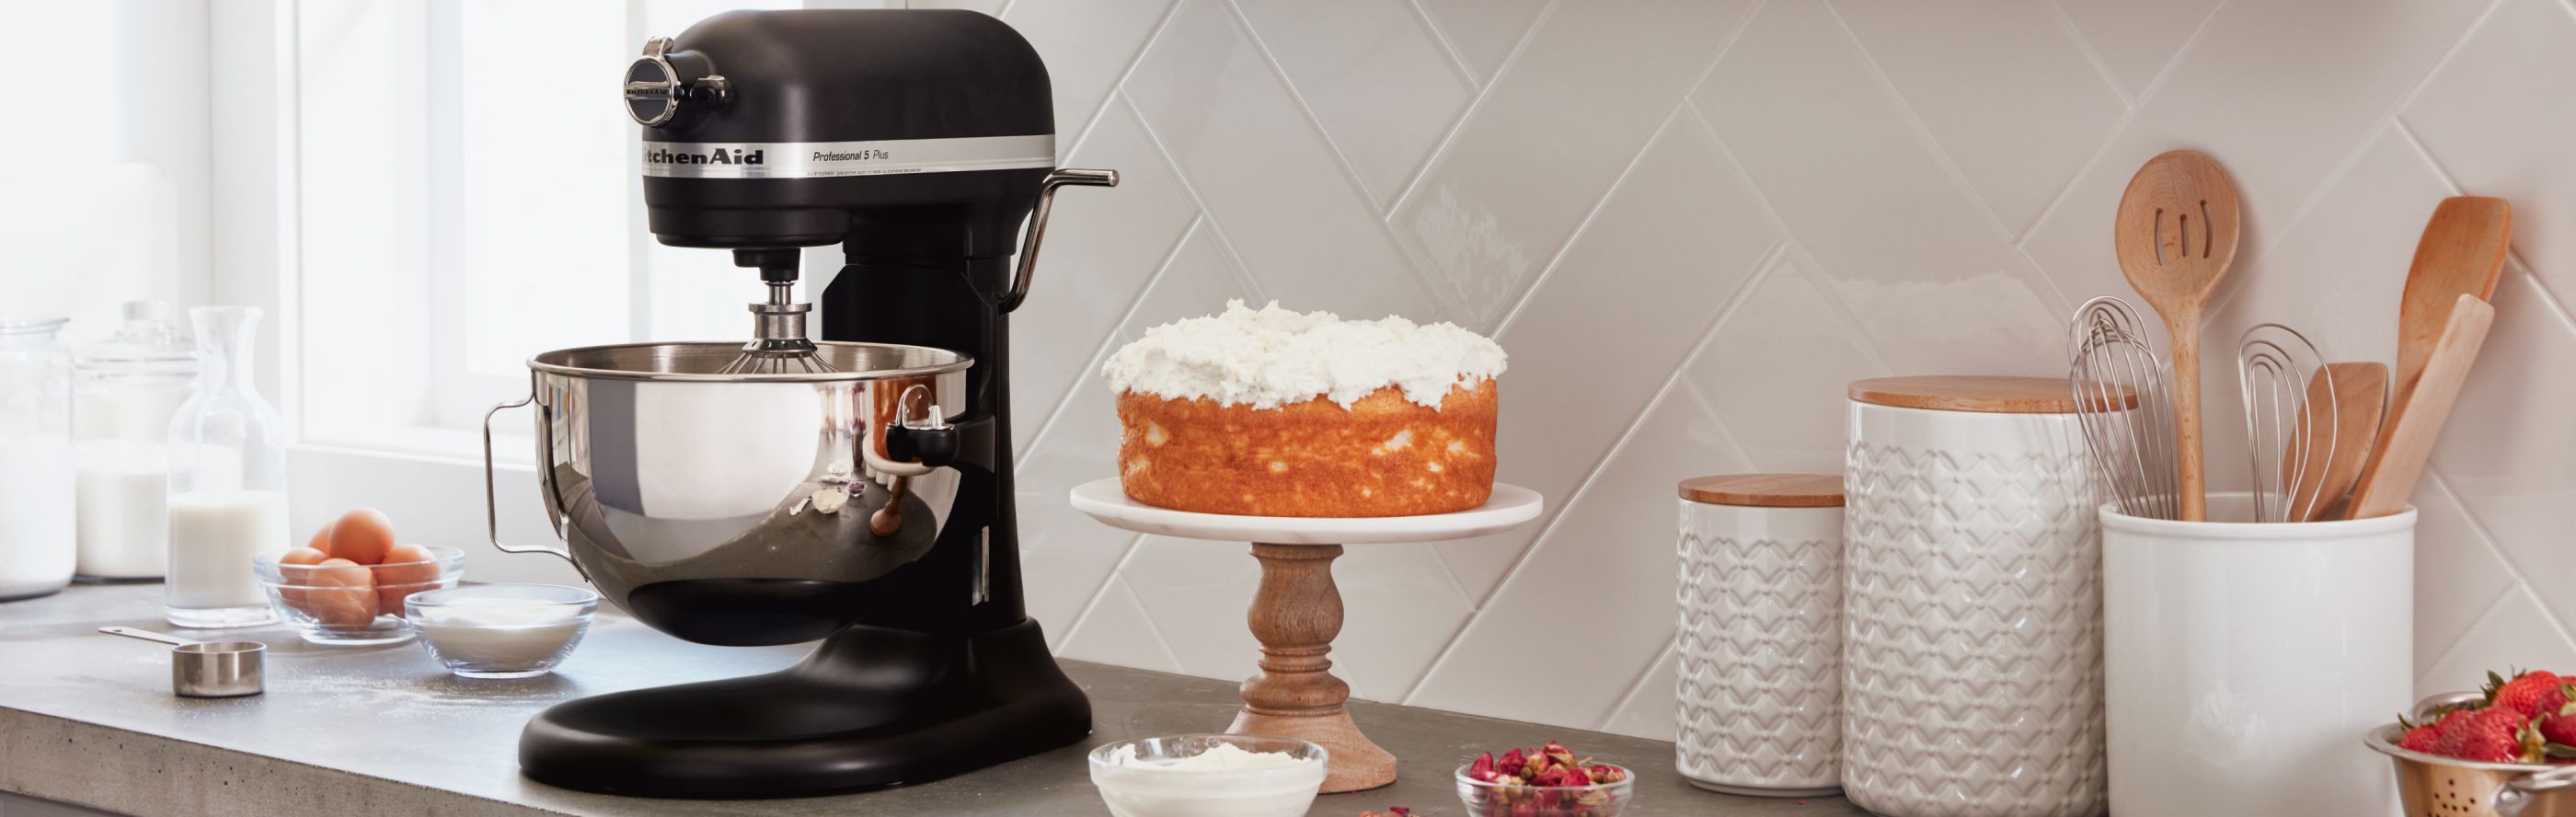 KitchenAid® bowl lift stand mixer with finished cake next to it.